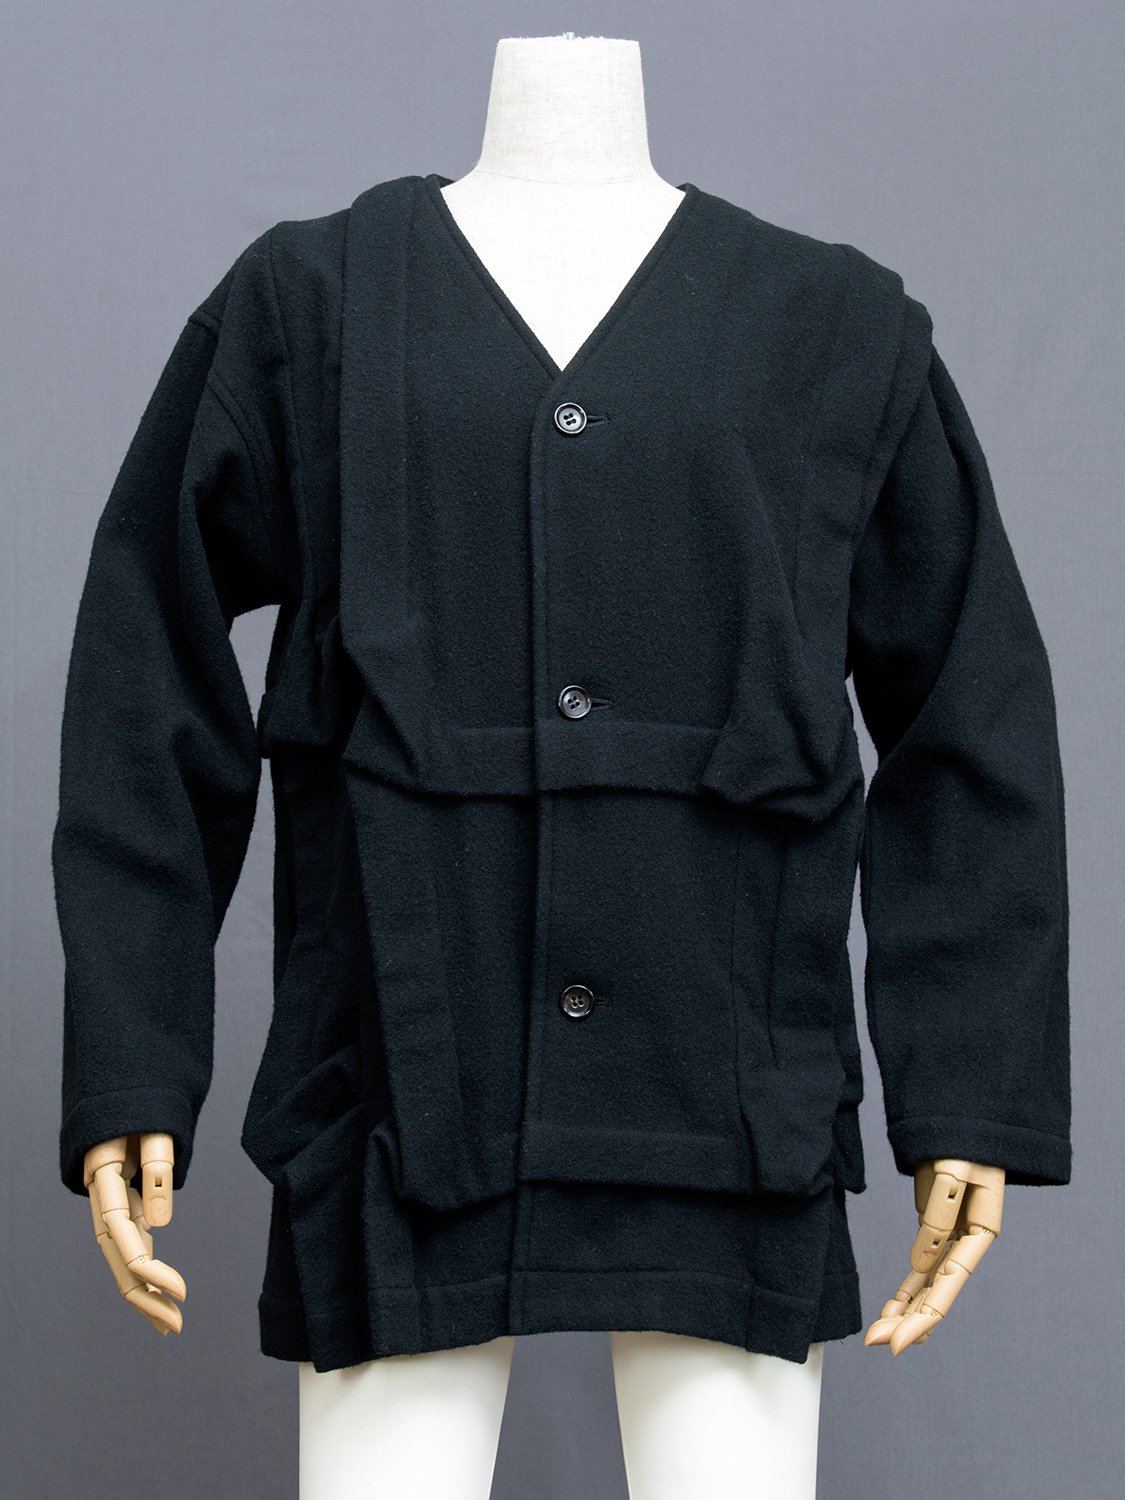 Comme Des Garcons Asymmetrical Wool Jacket, 1980s | Japanese